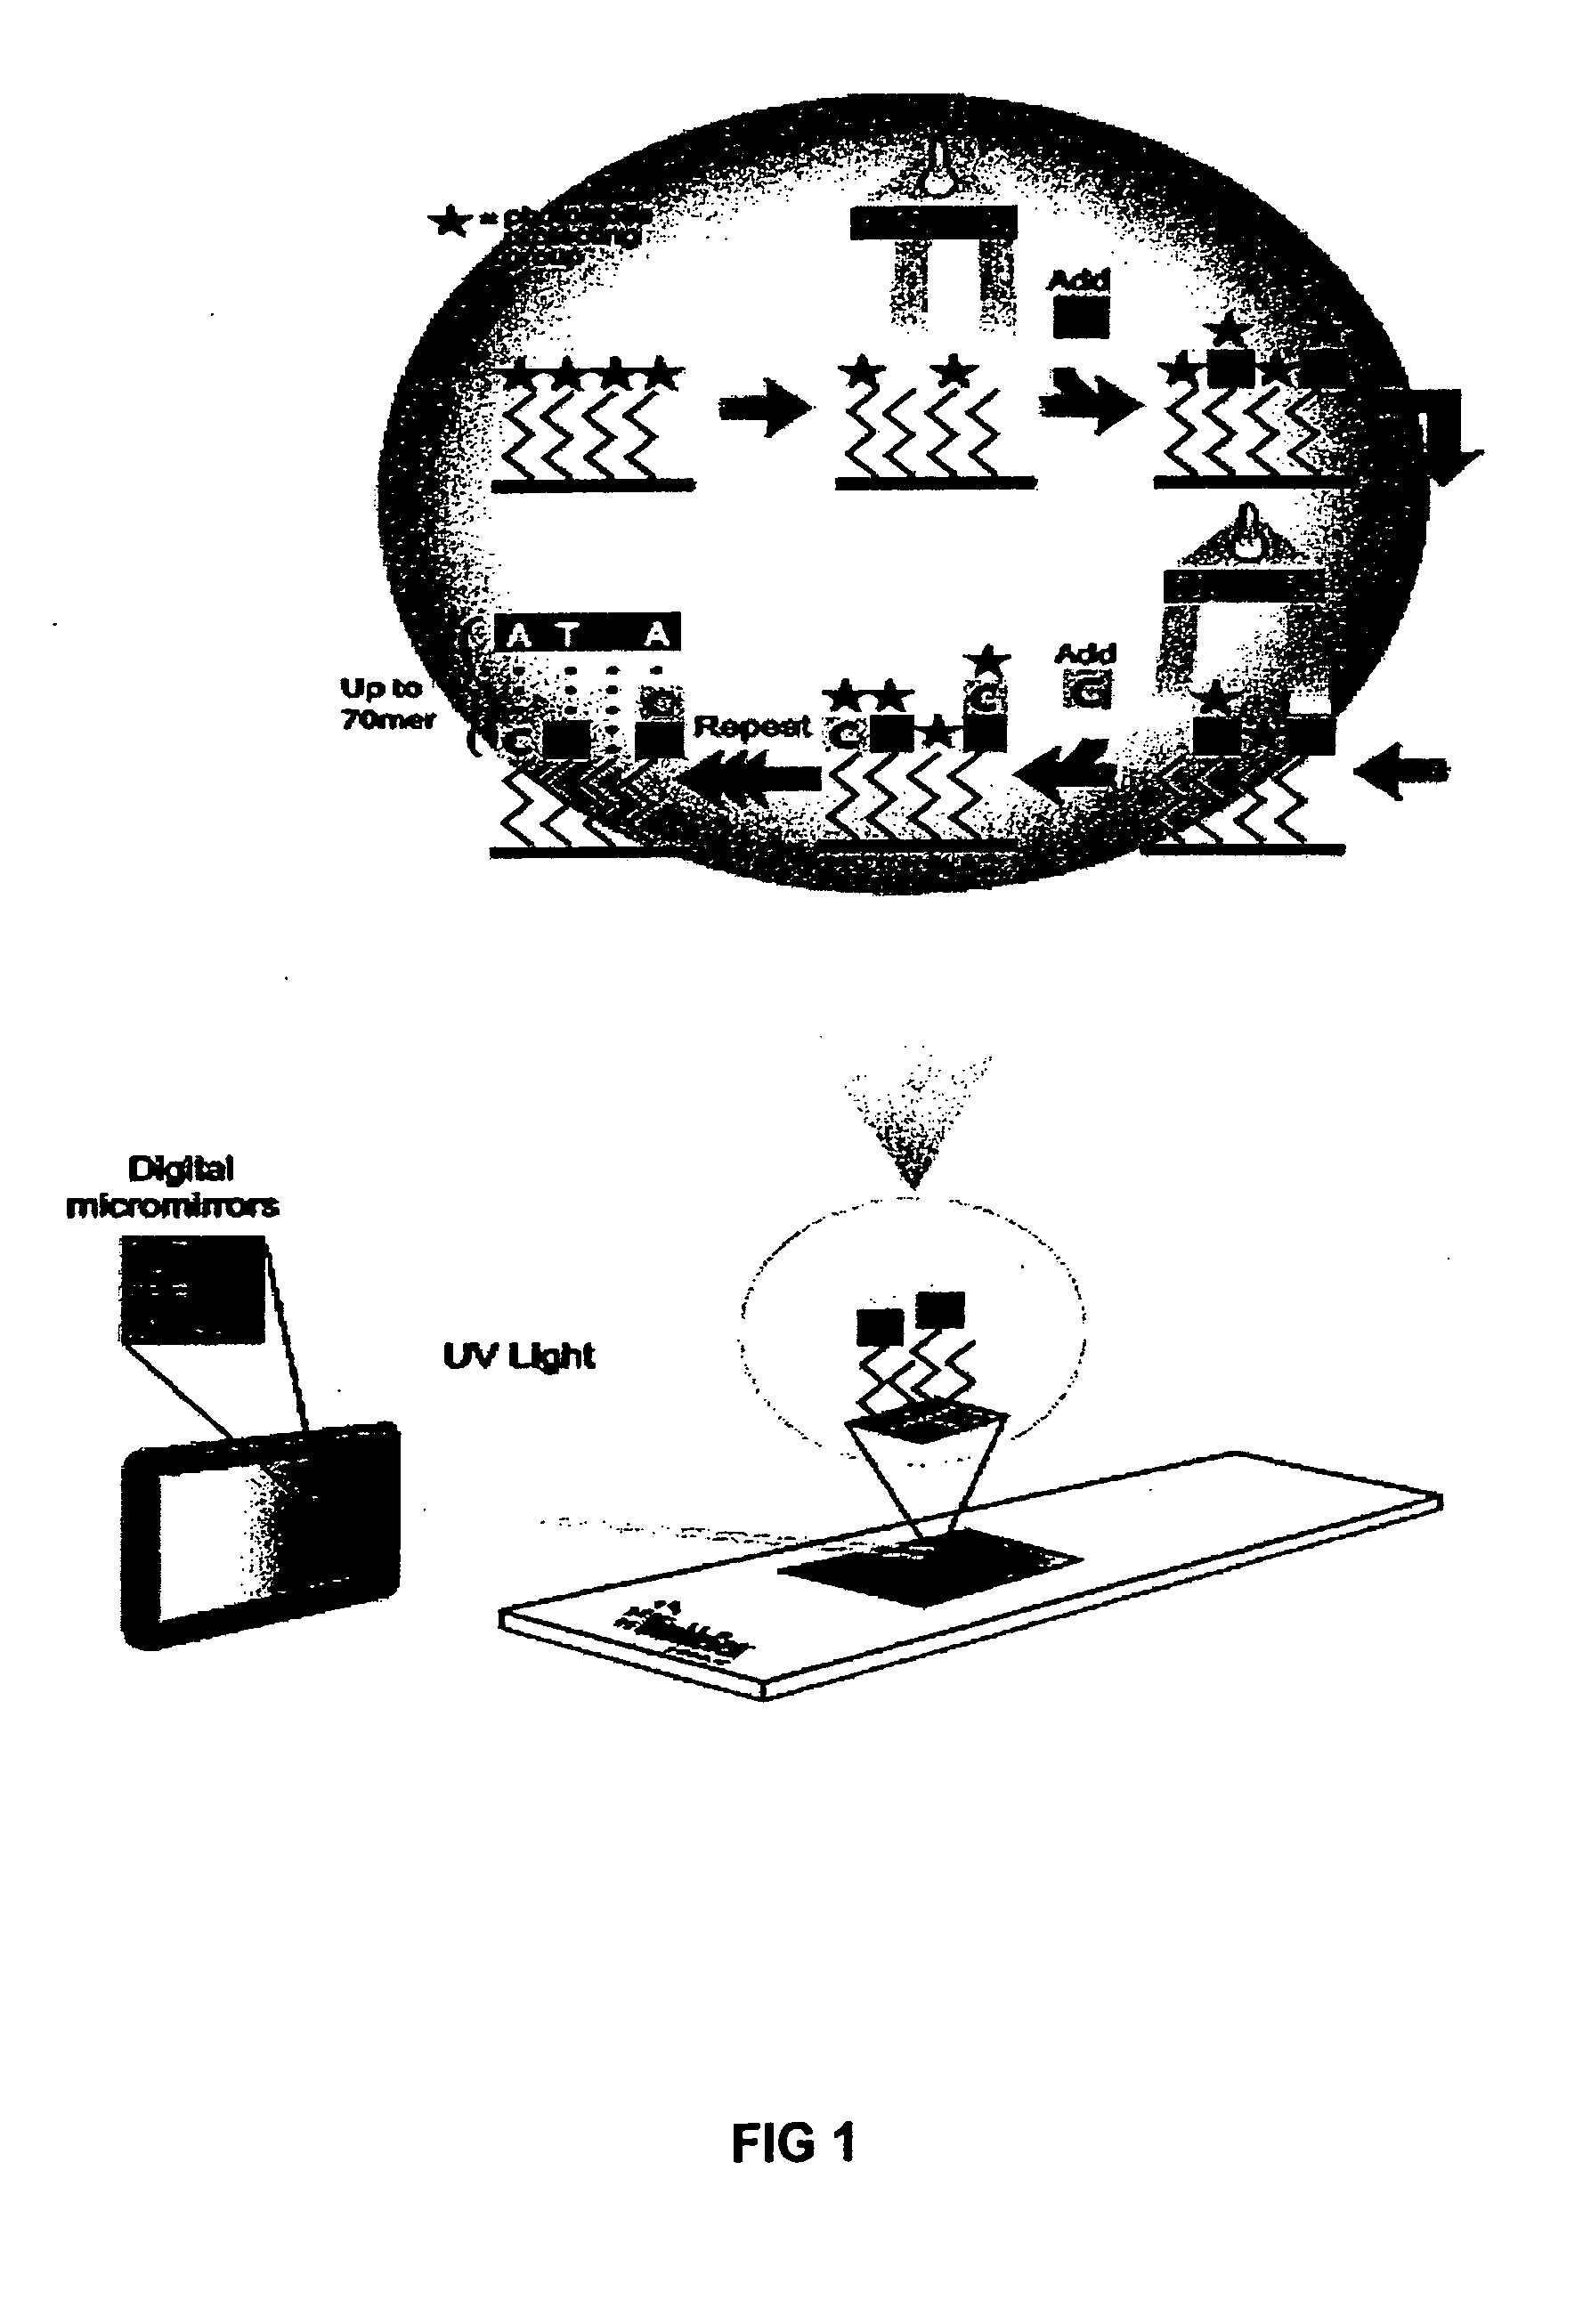 Method of performing PCR amplification on a microarray